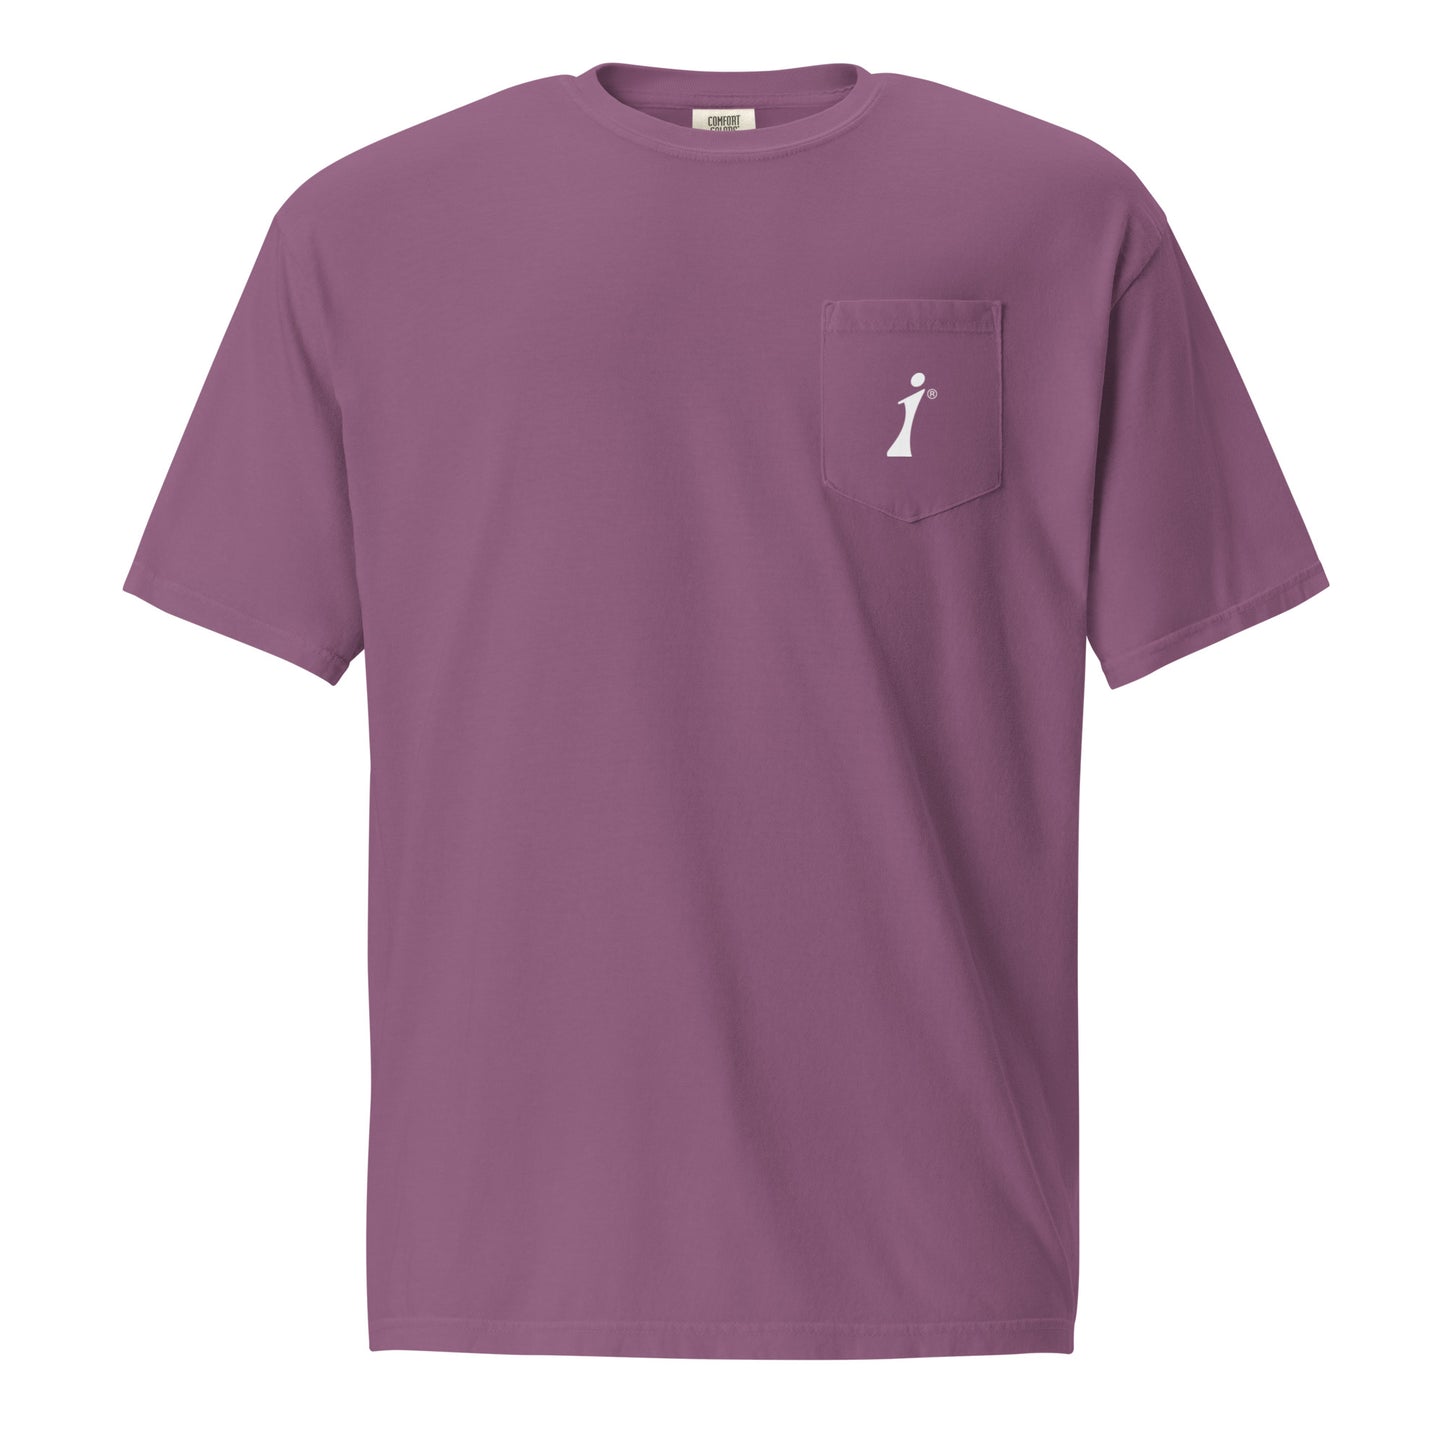 Sororities Are For Sisters | Pocket T-Shirt